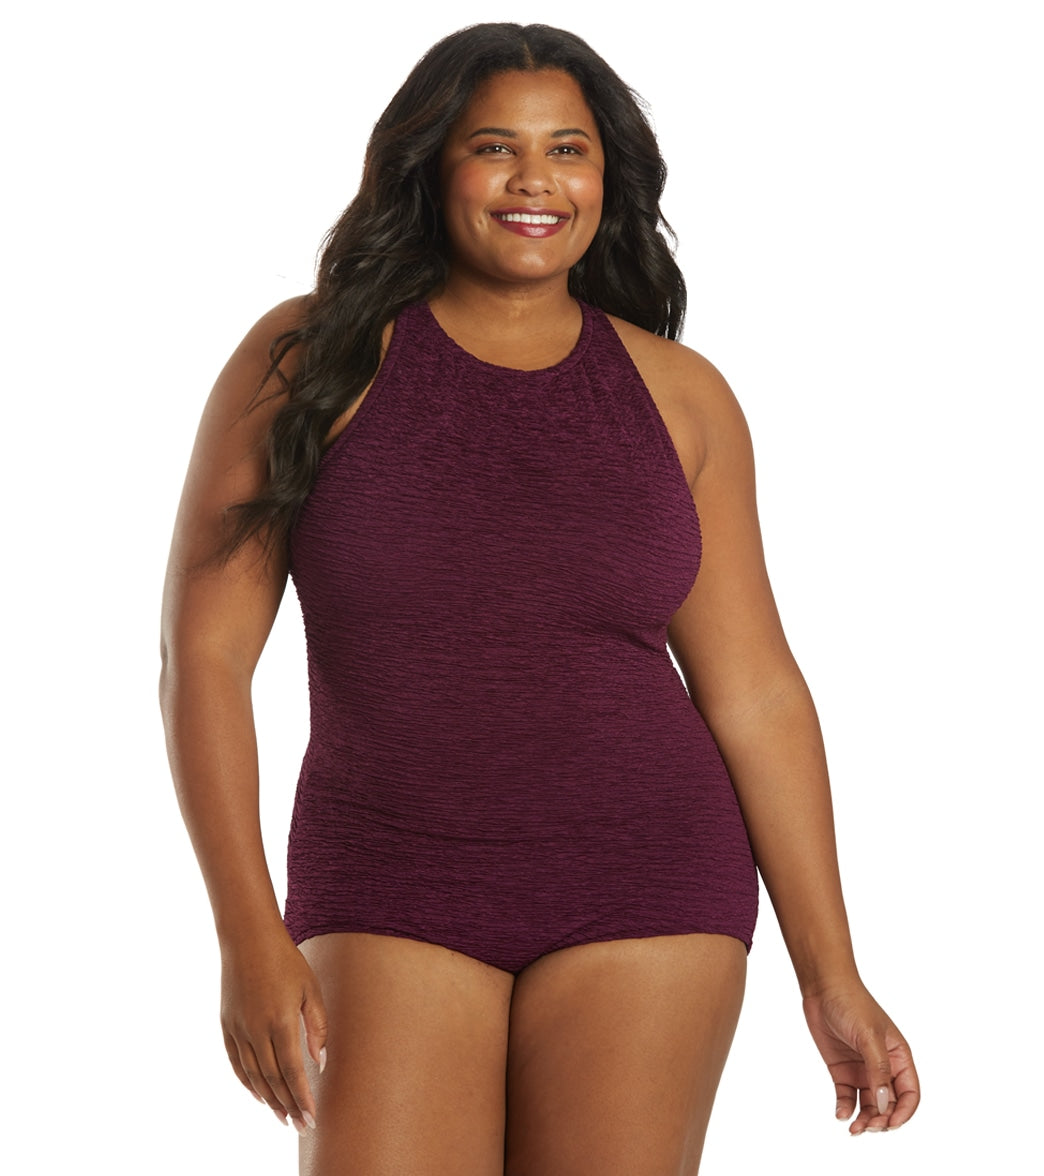 Krinkle Plus Chlorine Resistant High Neck Piece Swimsuit at SwimOutlet.com